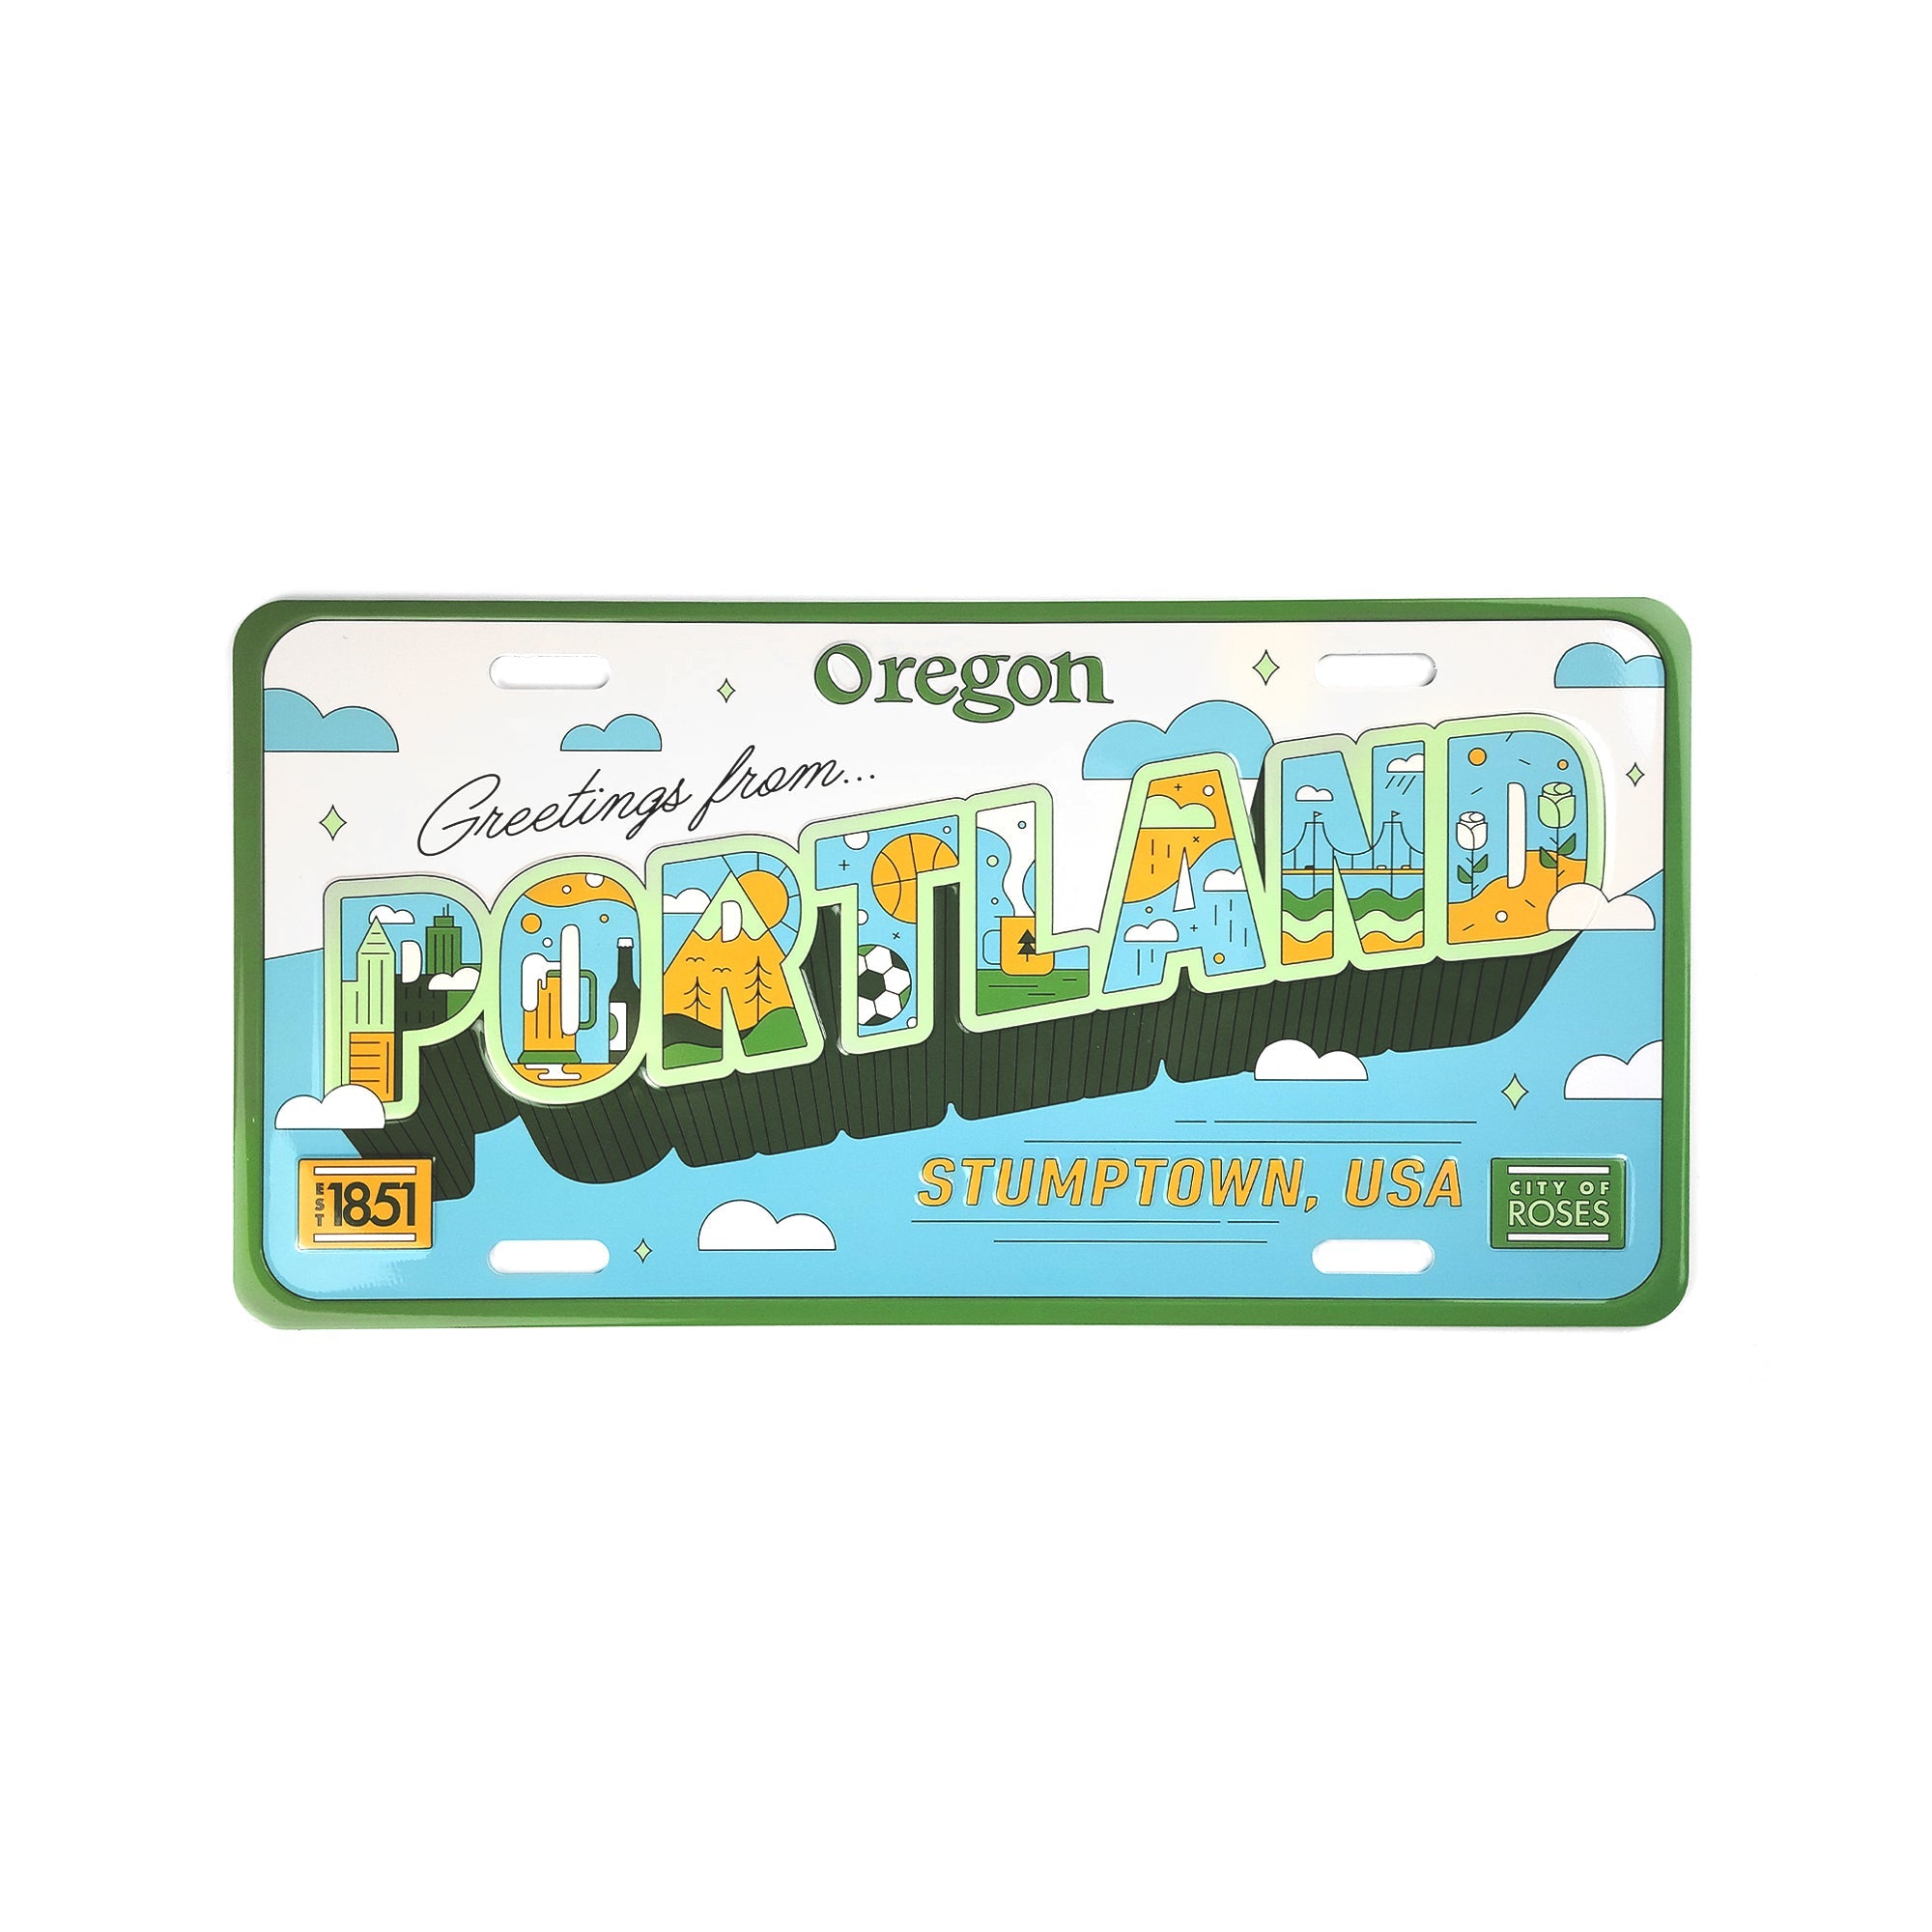 Greetings From Portland Souvenir License Plate - Vehicle License Plates - Hello From Oregon